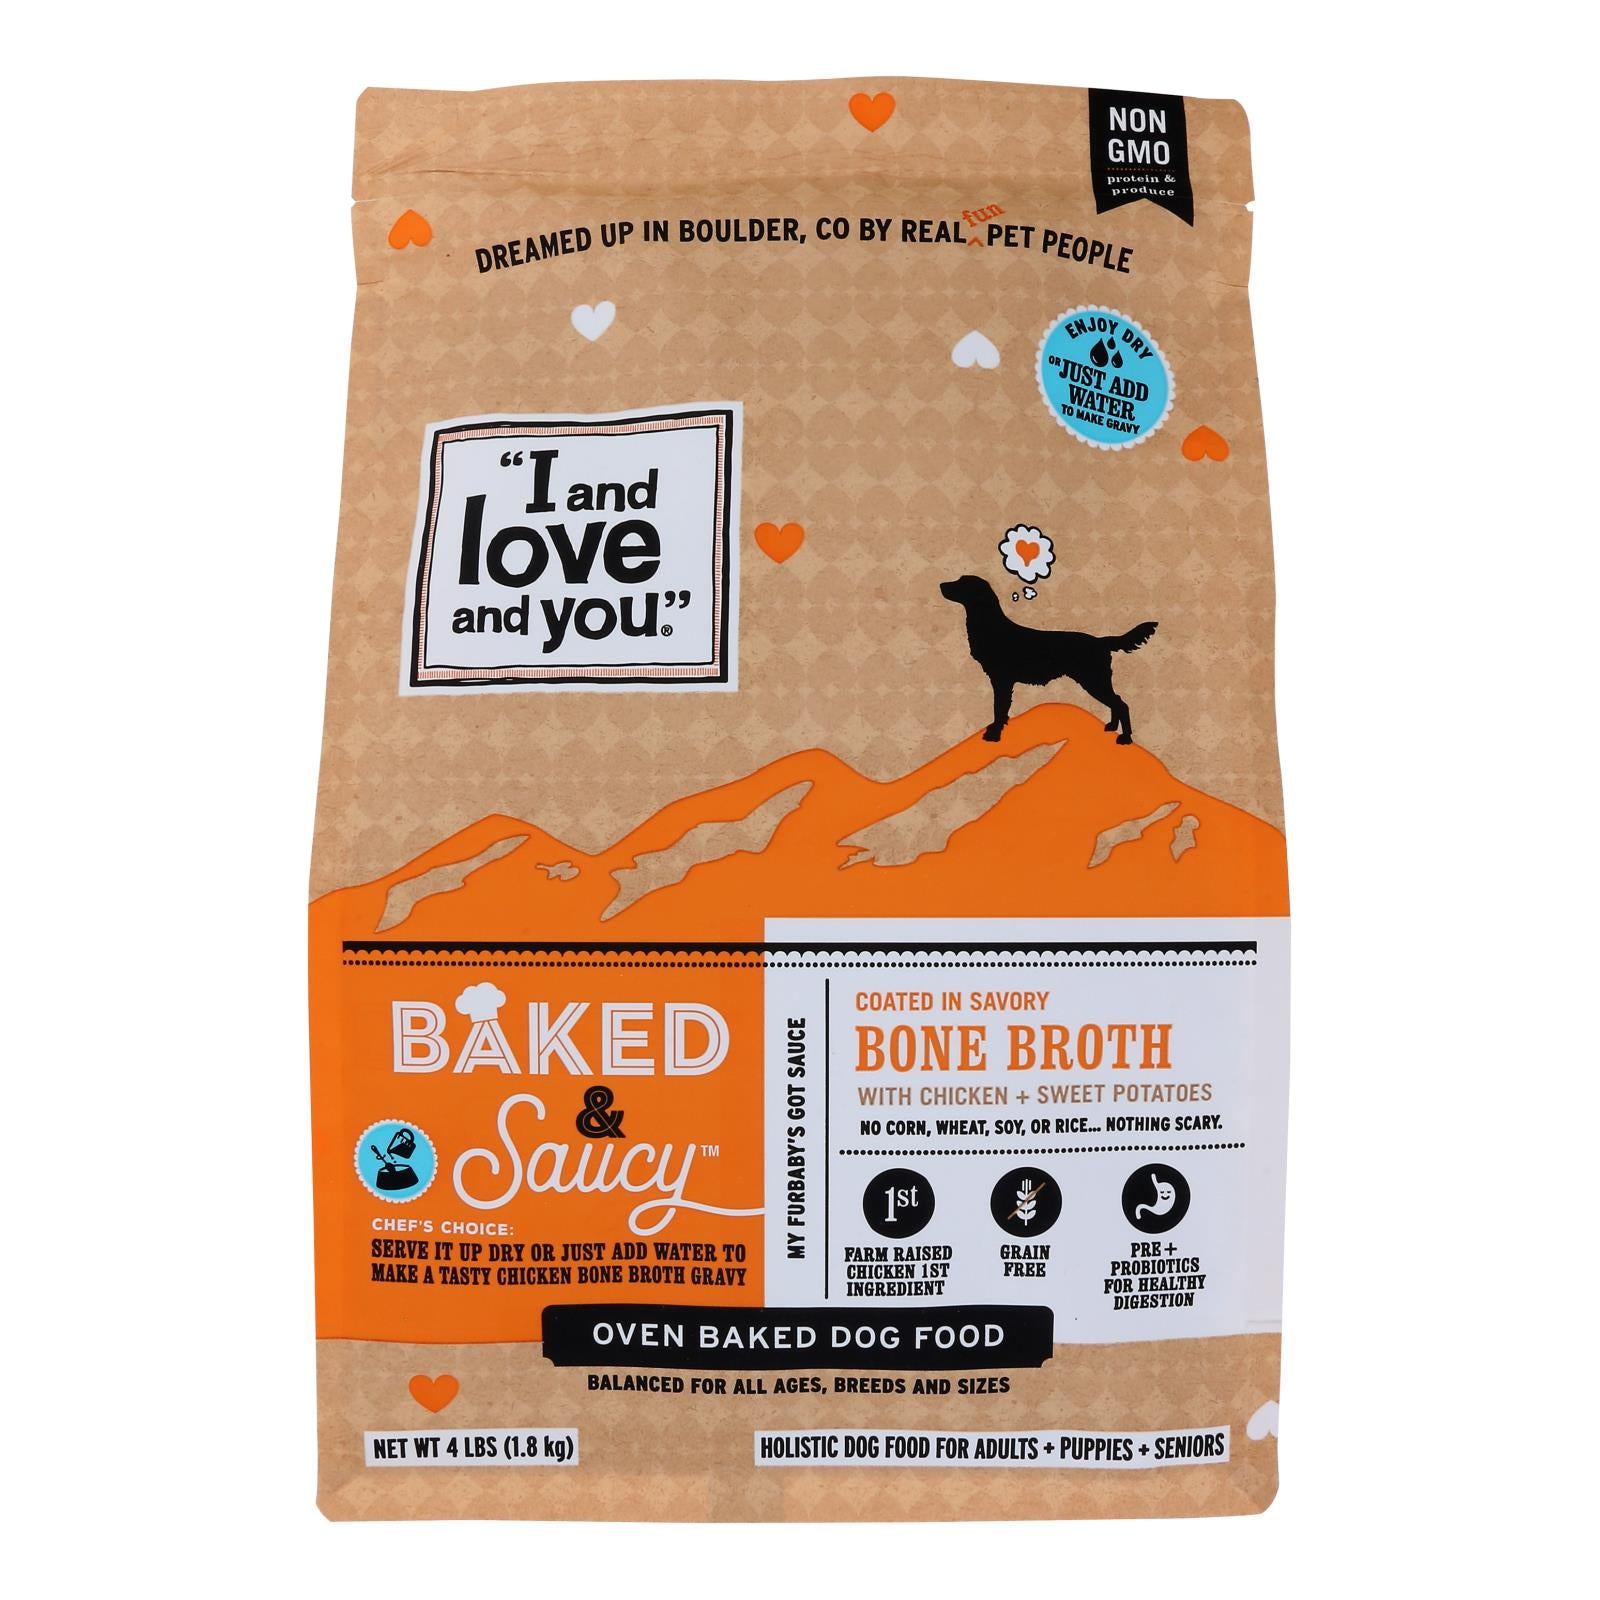 I And Love And You - Dog Food Baked Saucy Ckn - Case Of 6 - 4 Lb